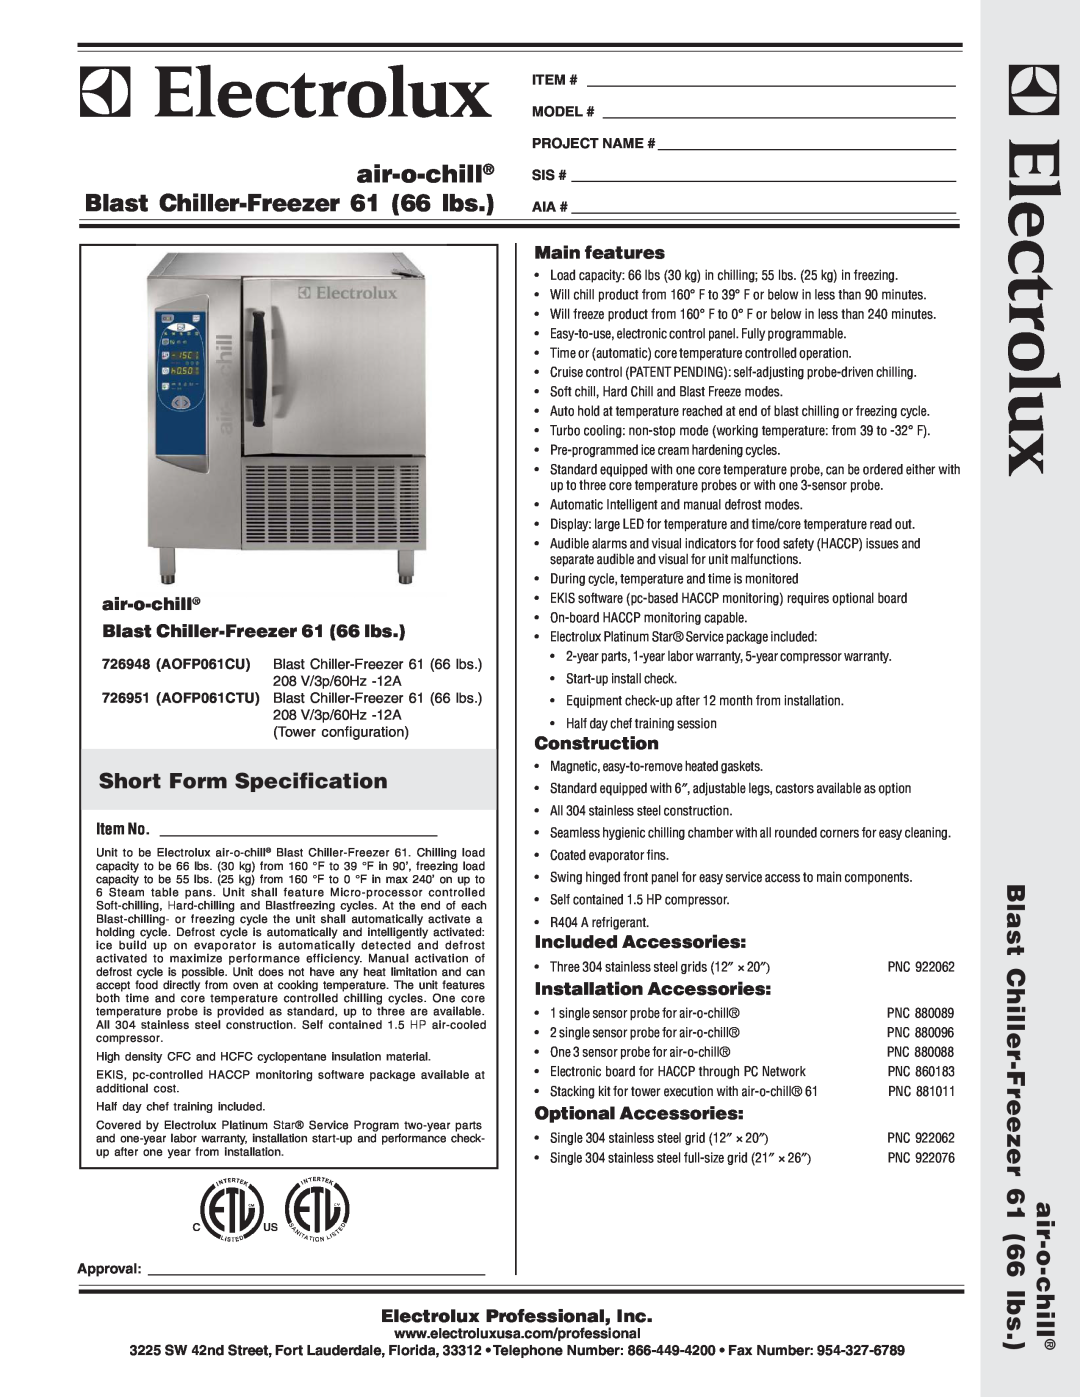 Electrolux 726951 warranty Short Form Specification, air-o-chill Blast Chiller-Freezer 61 66 lbs, Main features, chill lbs 